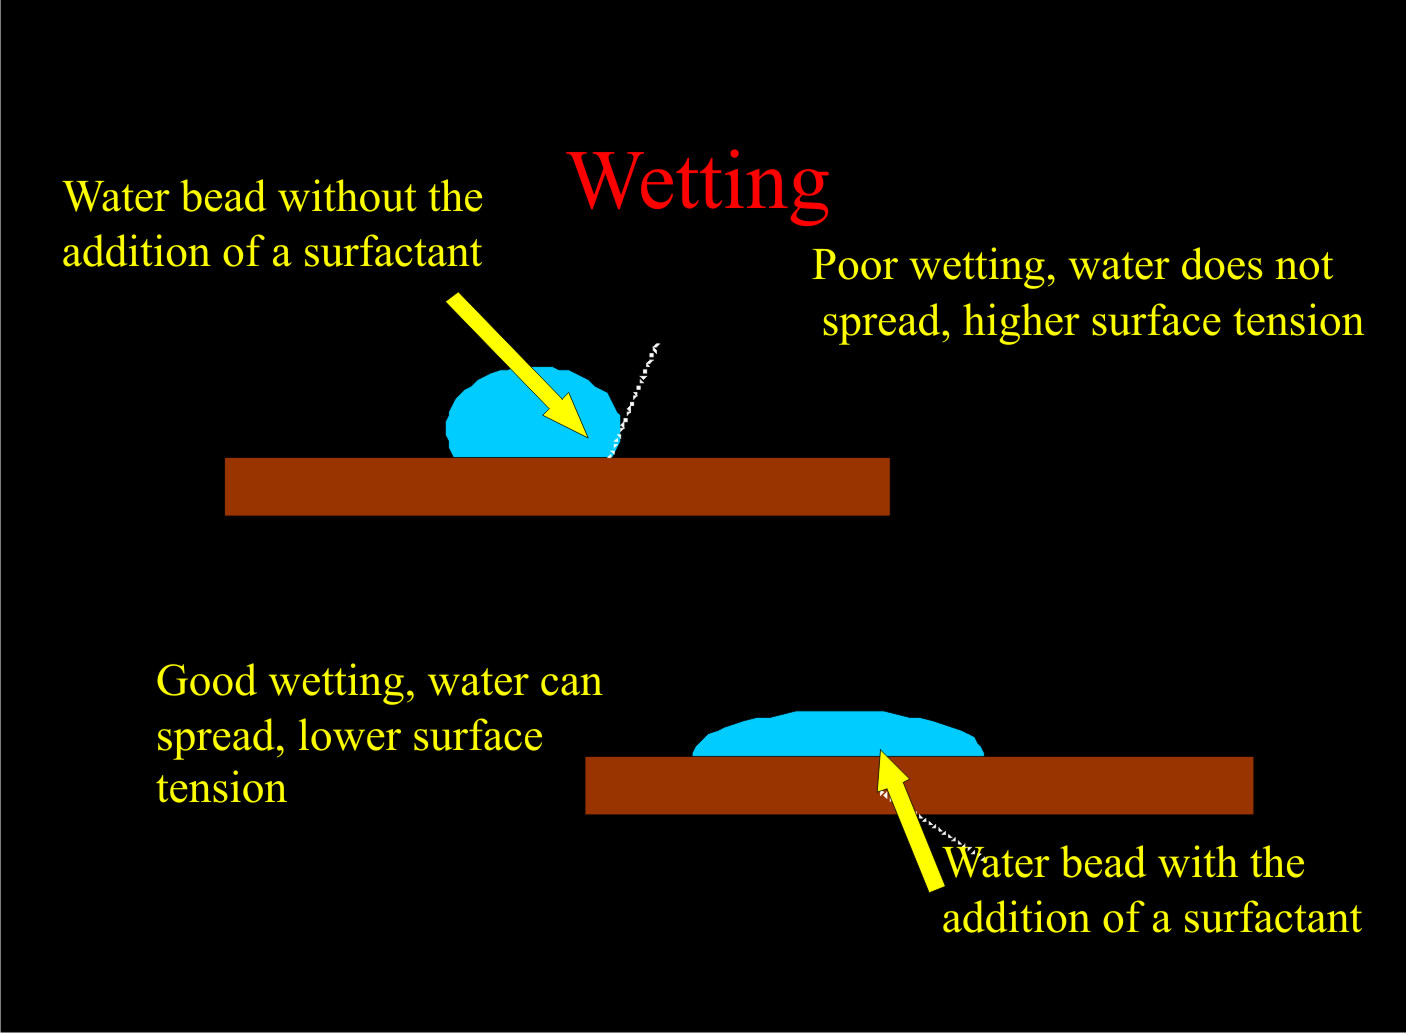 Water beads without and with surfactant. The bead without surfactant has higher surface tension and does not spread. The bead with a surfactant spreads out more.